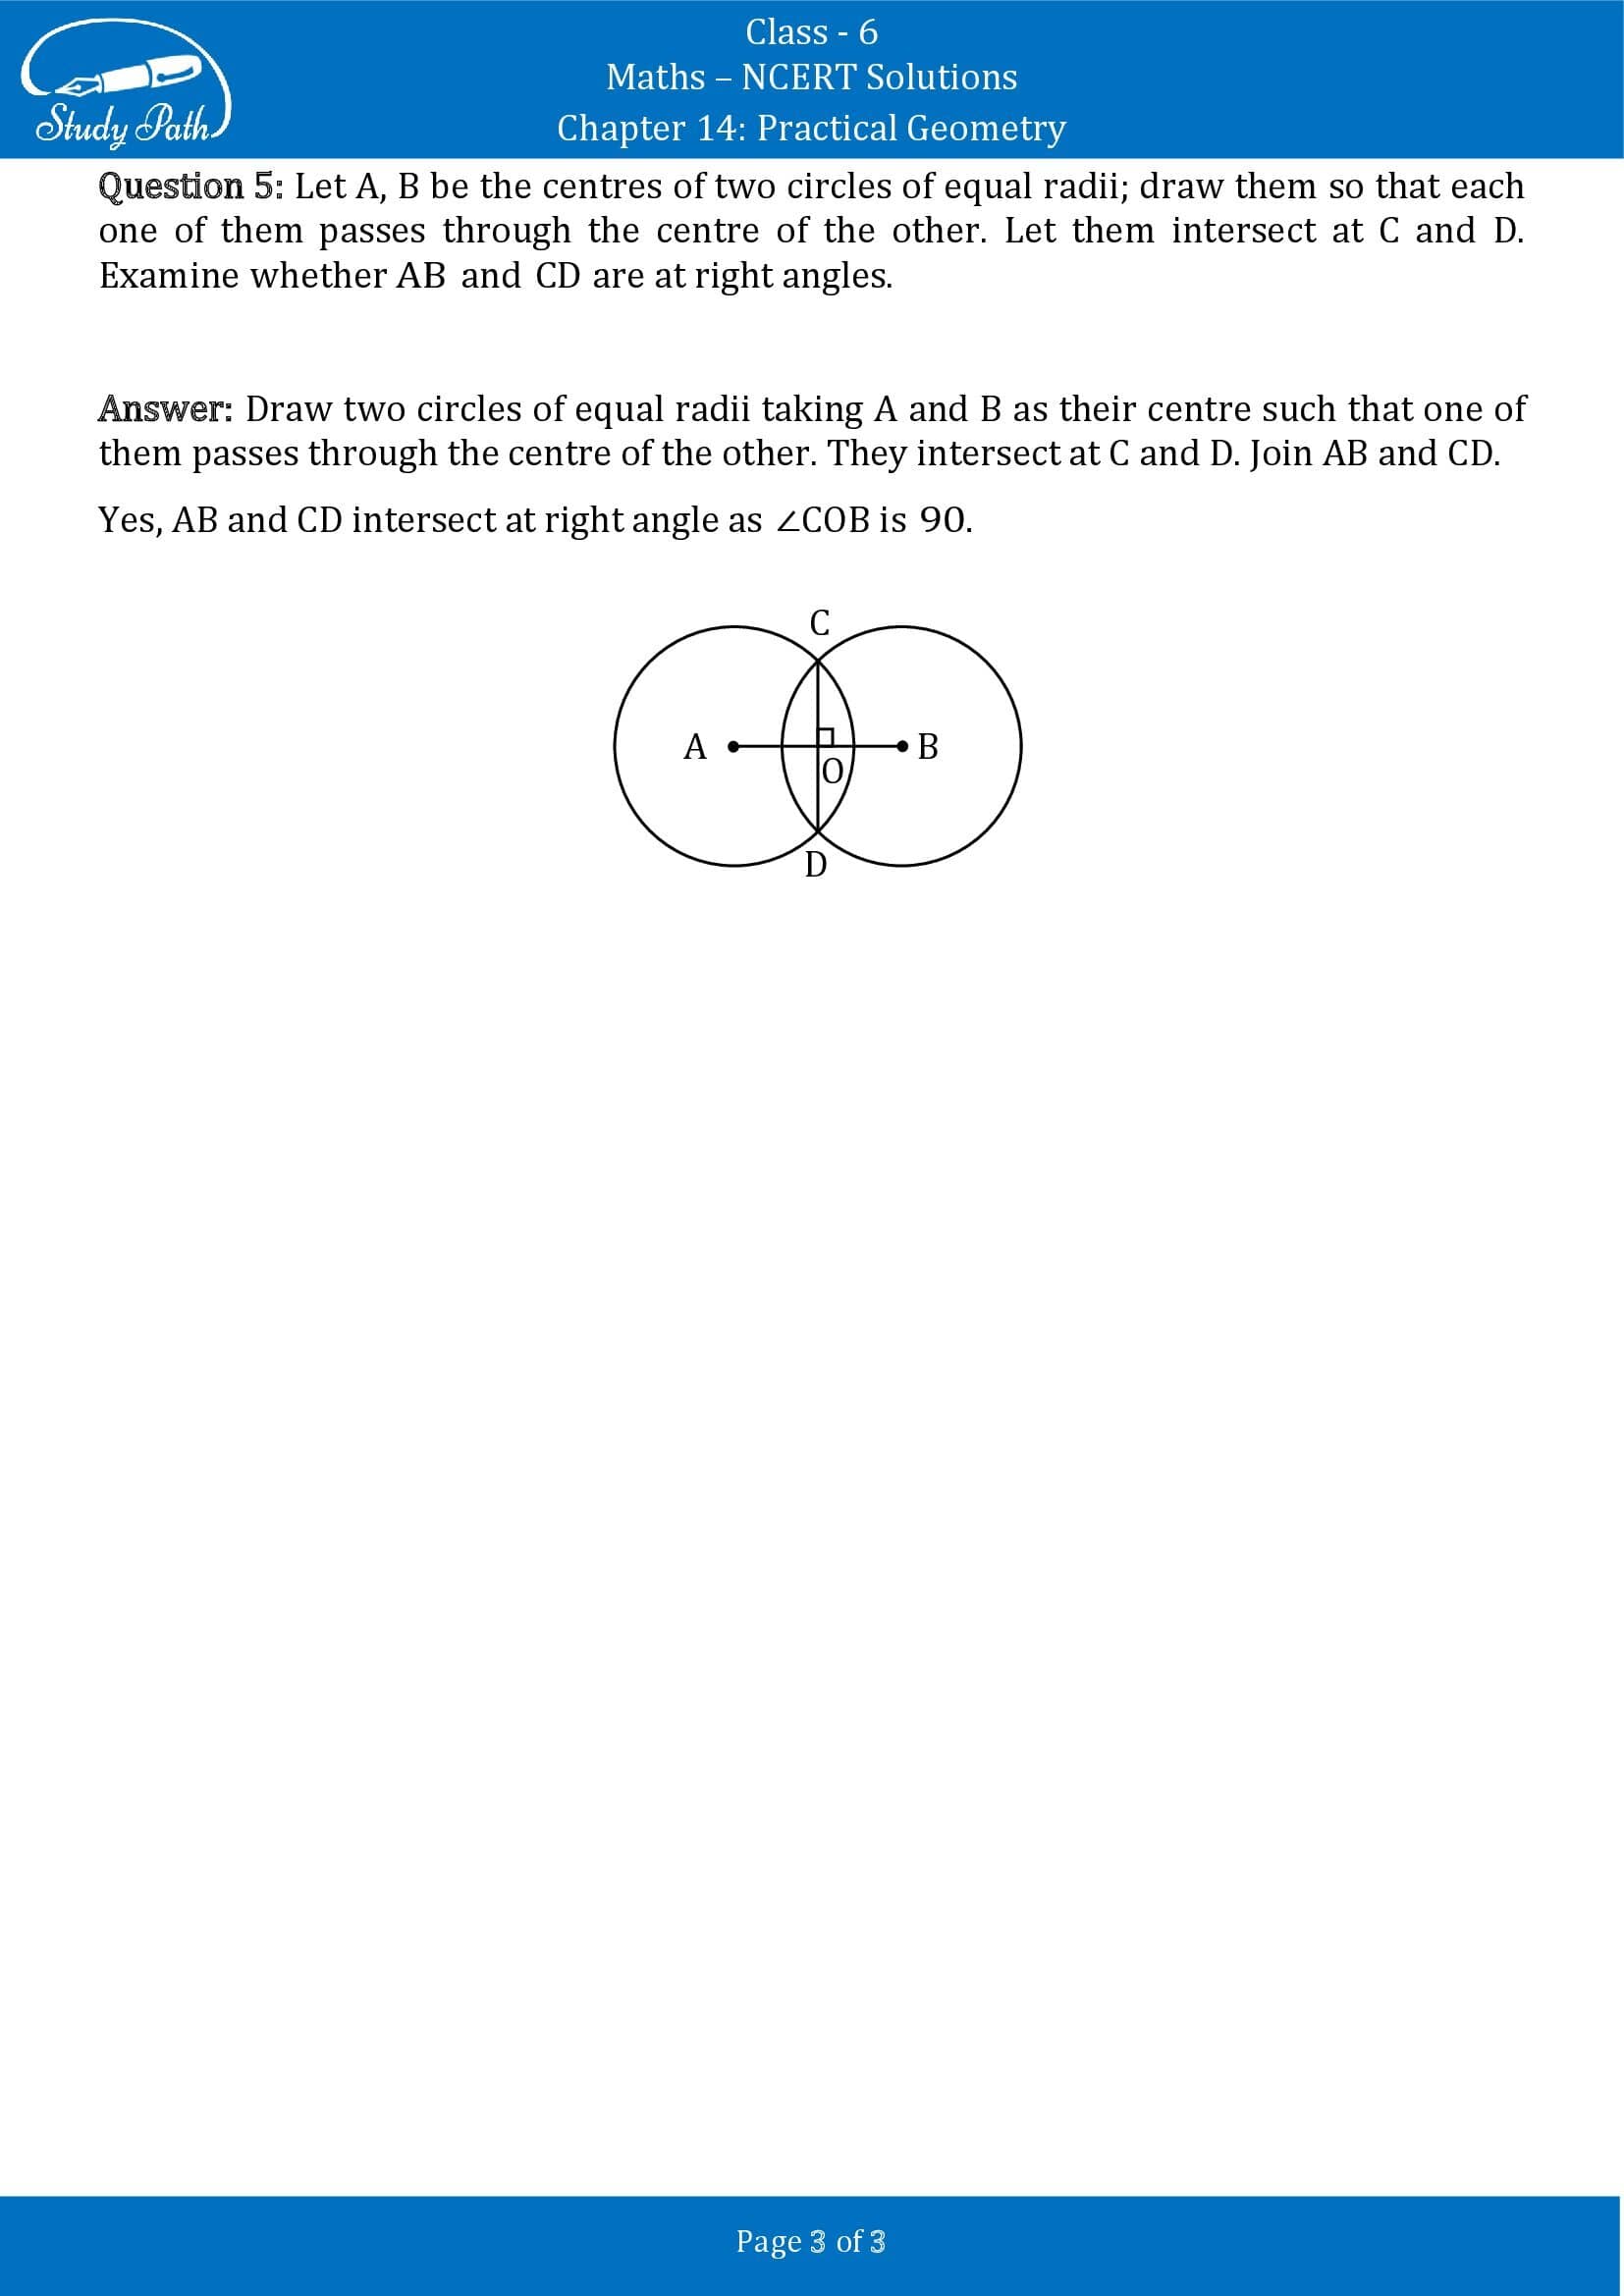 NCERT Solutions for Class 6 Maths Chapter 14 Practical Geometry Exercise 14.1 00003